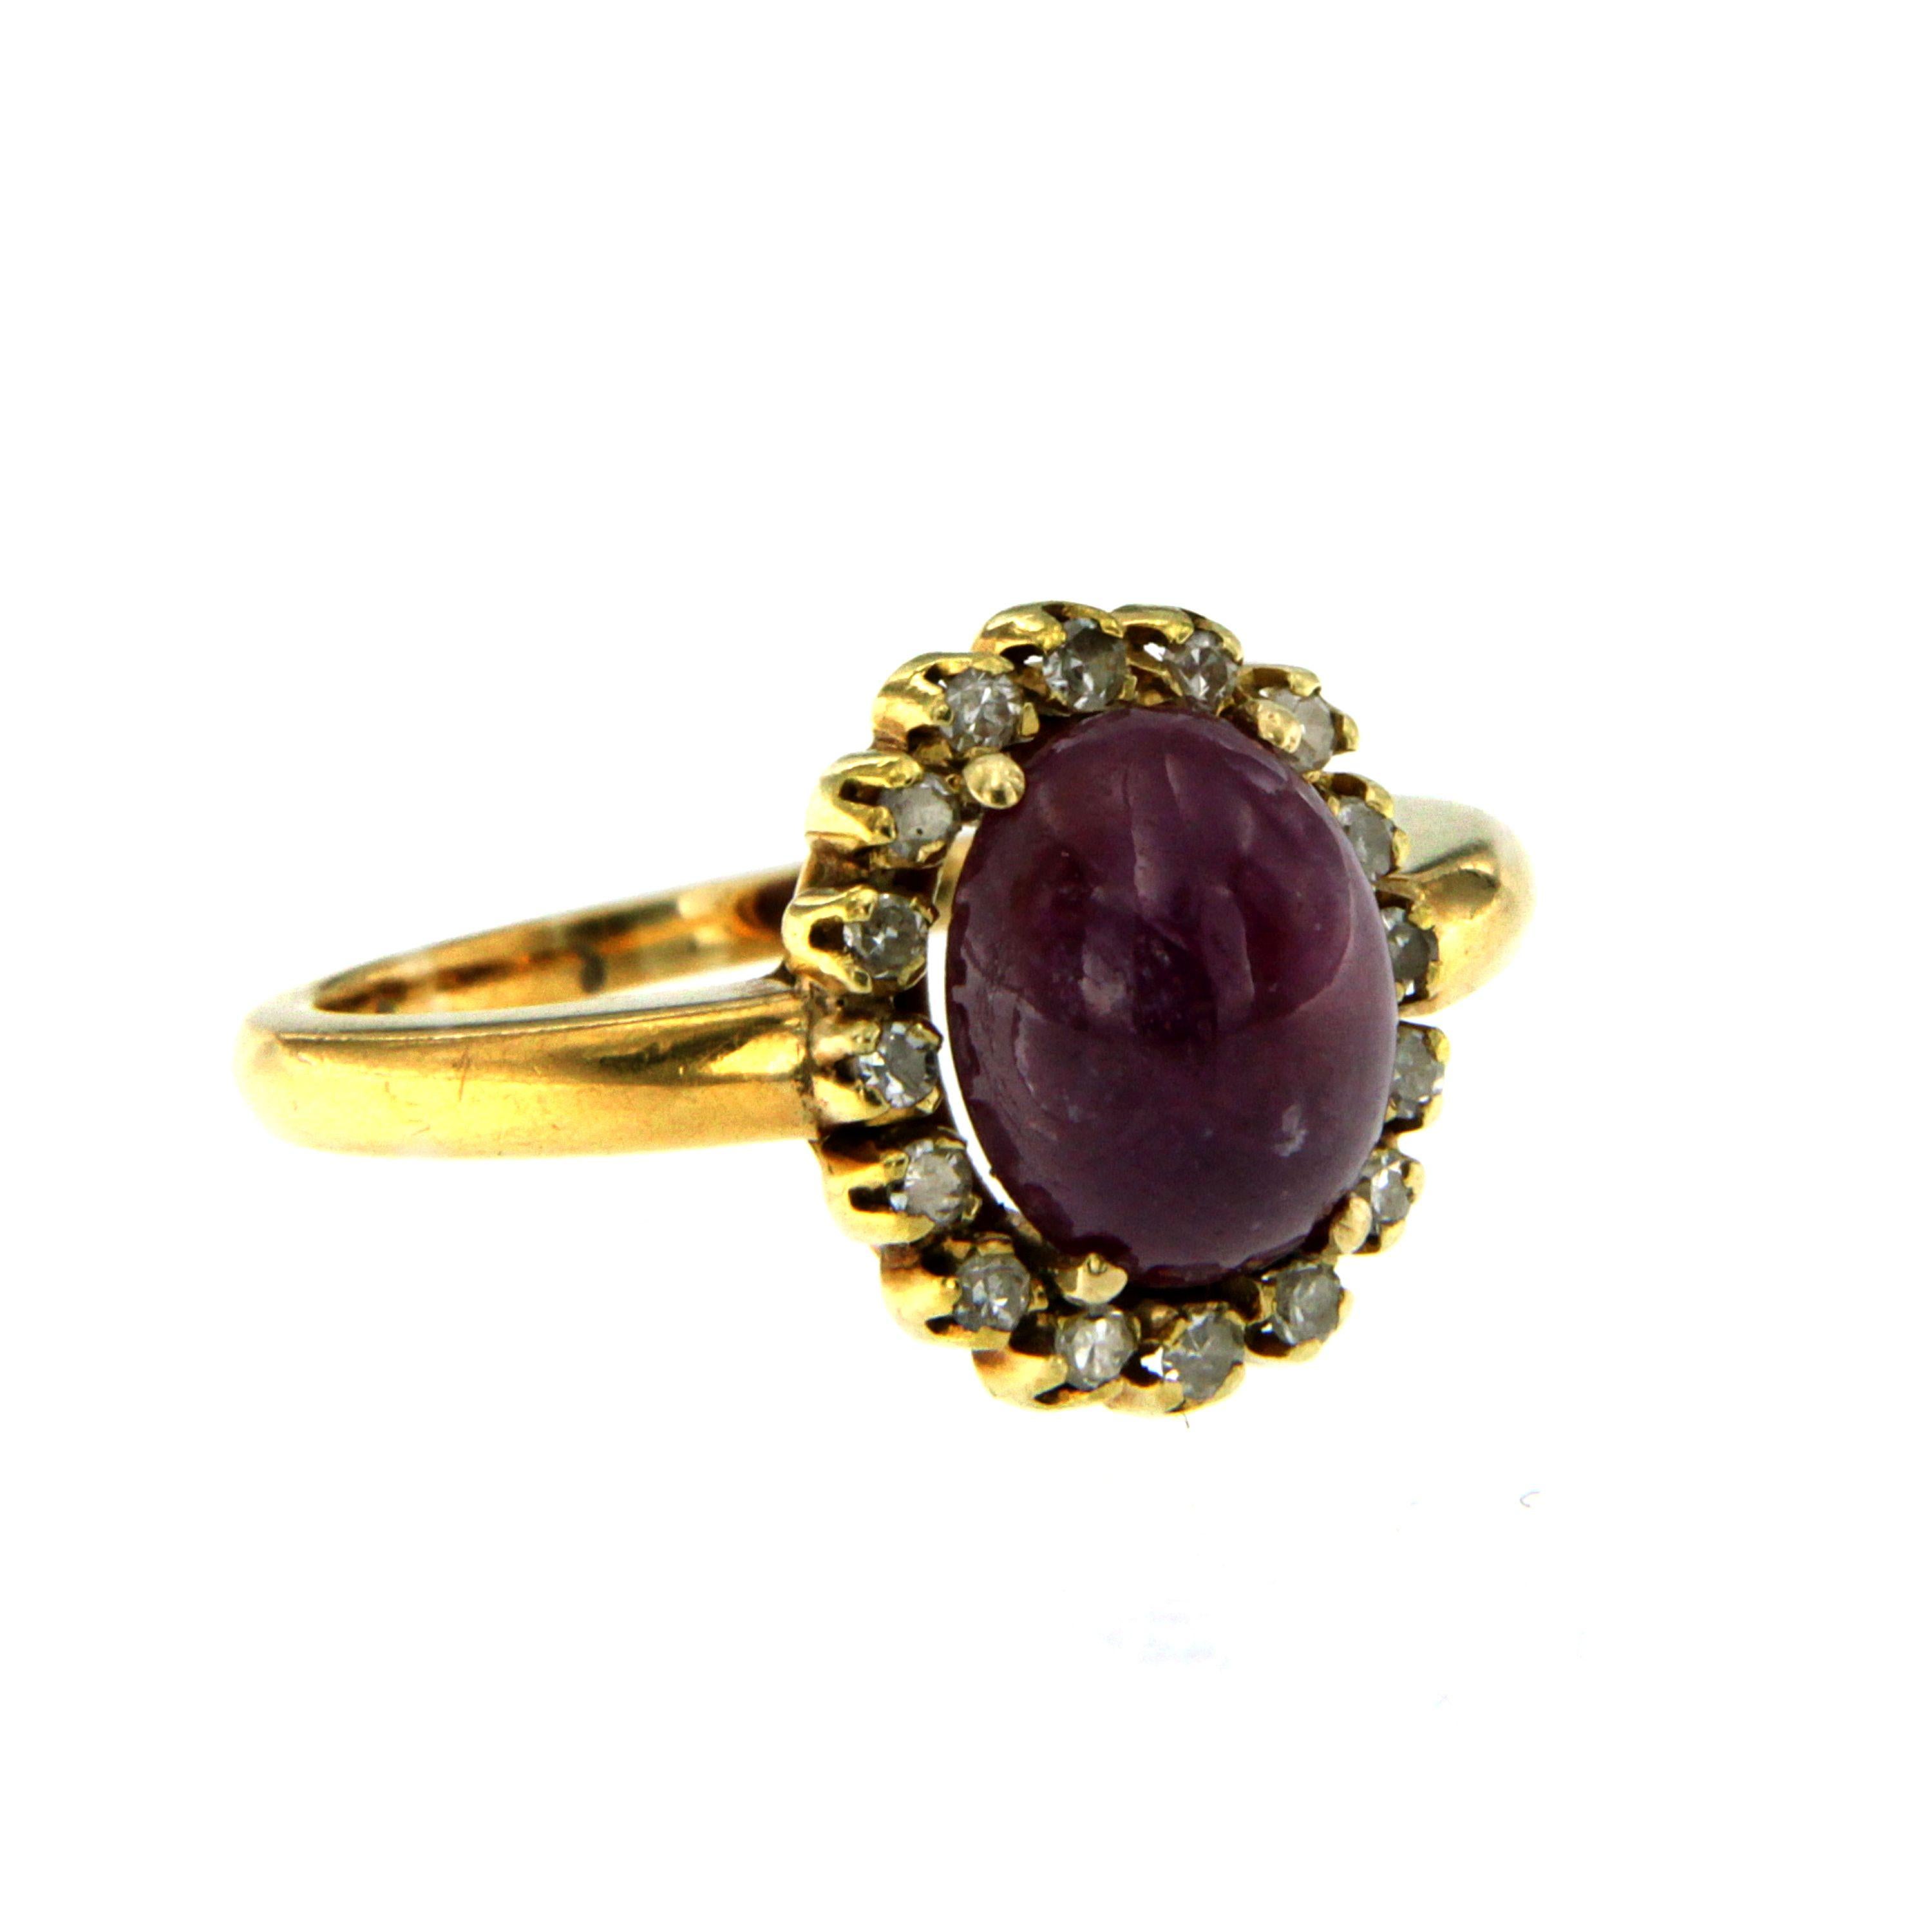 18k yellowGold clusters ring containing one oval cut cabochon Ruby weighing 2.00 carat surrounded round brilliant cut diamonds weighing 0.20 total cts H color vs clarity.

Ring Size: US 6.5 - IT 13 - FR 53 - UK N 
This ring may be professionally